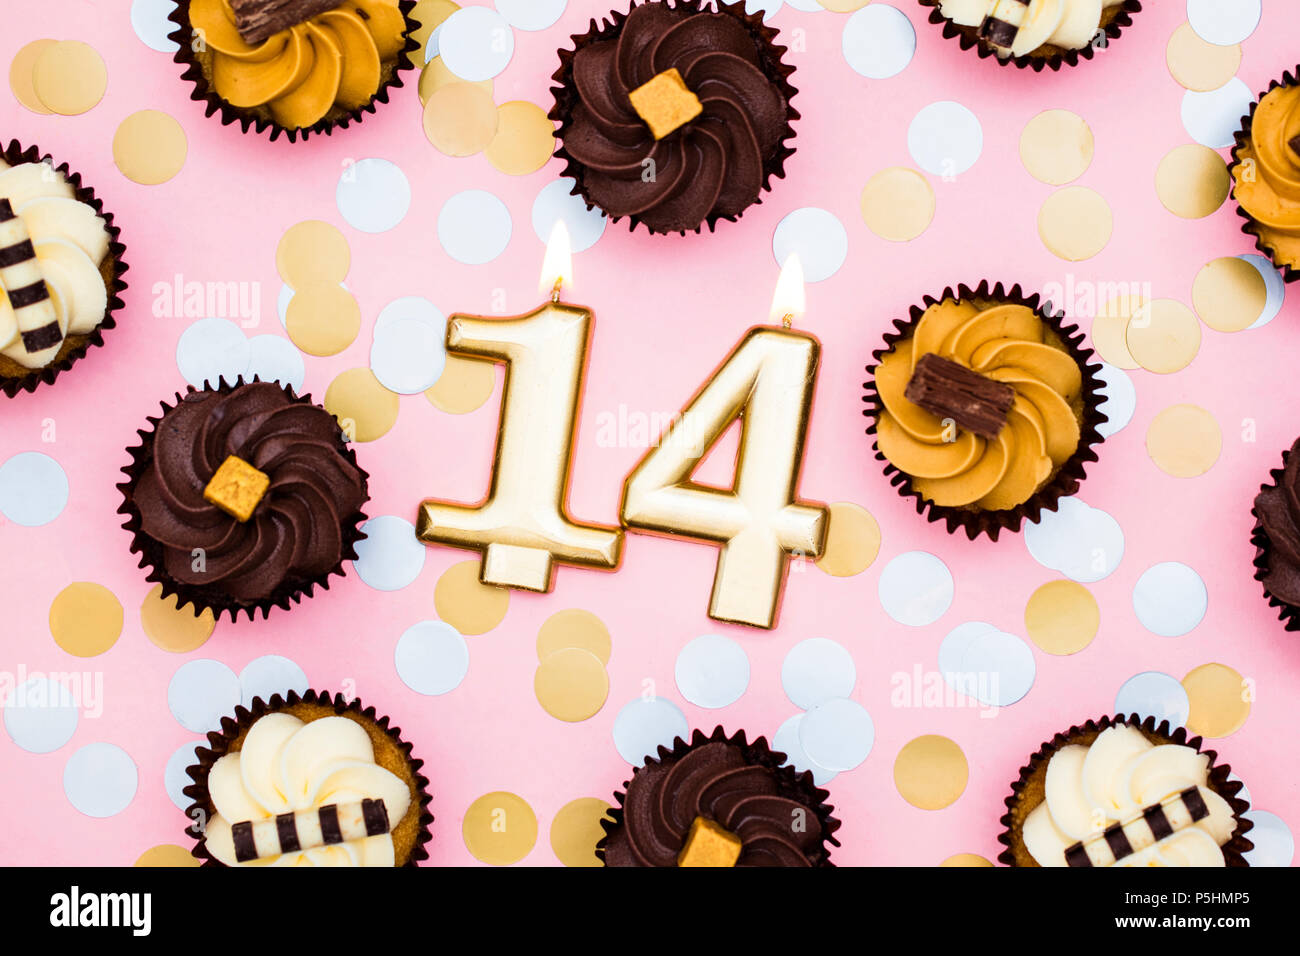 Number 14 gold candle with cupcakes against a pastel pink background Stock Photo